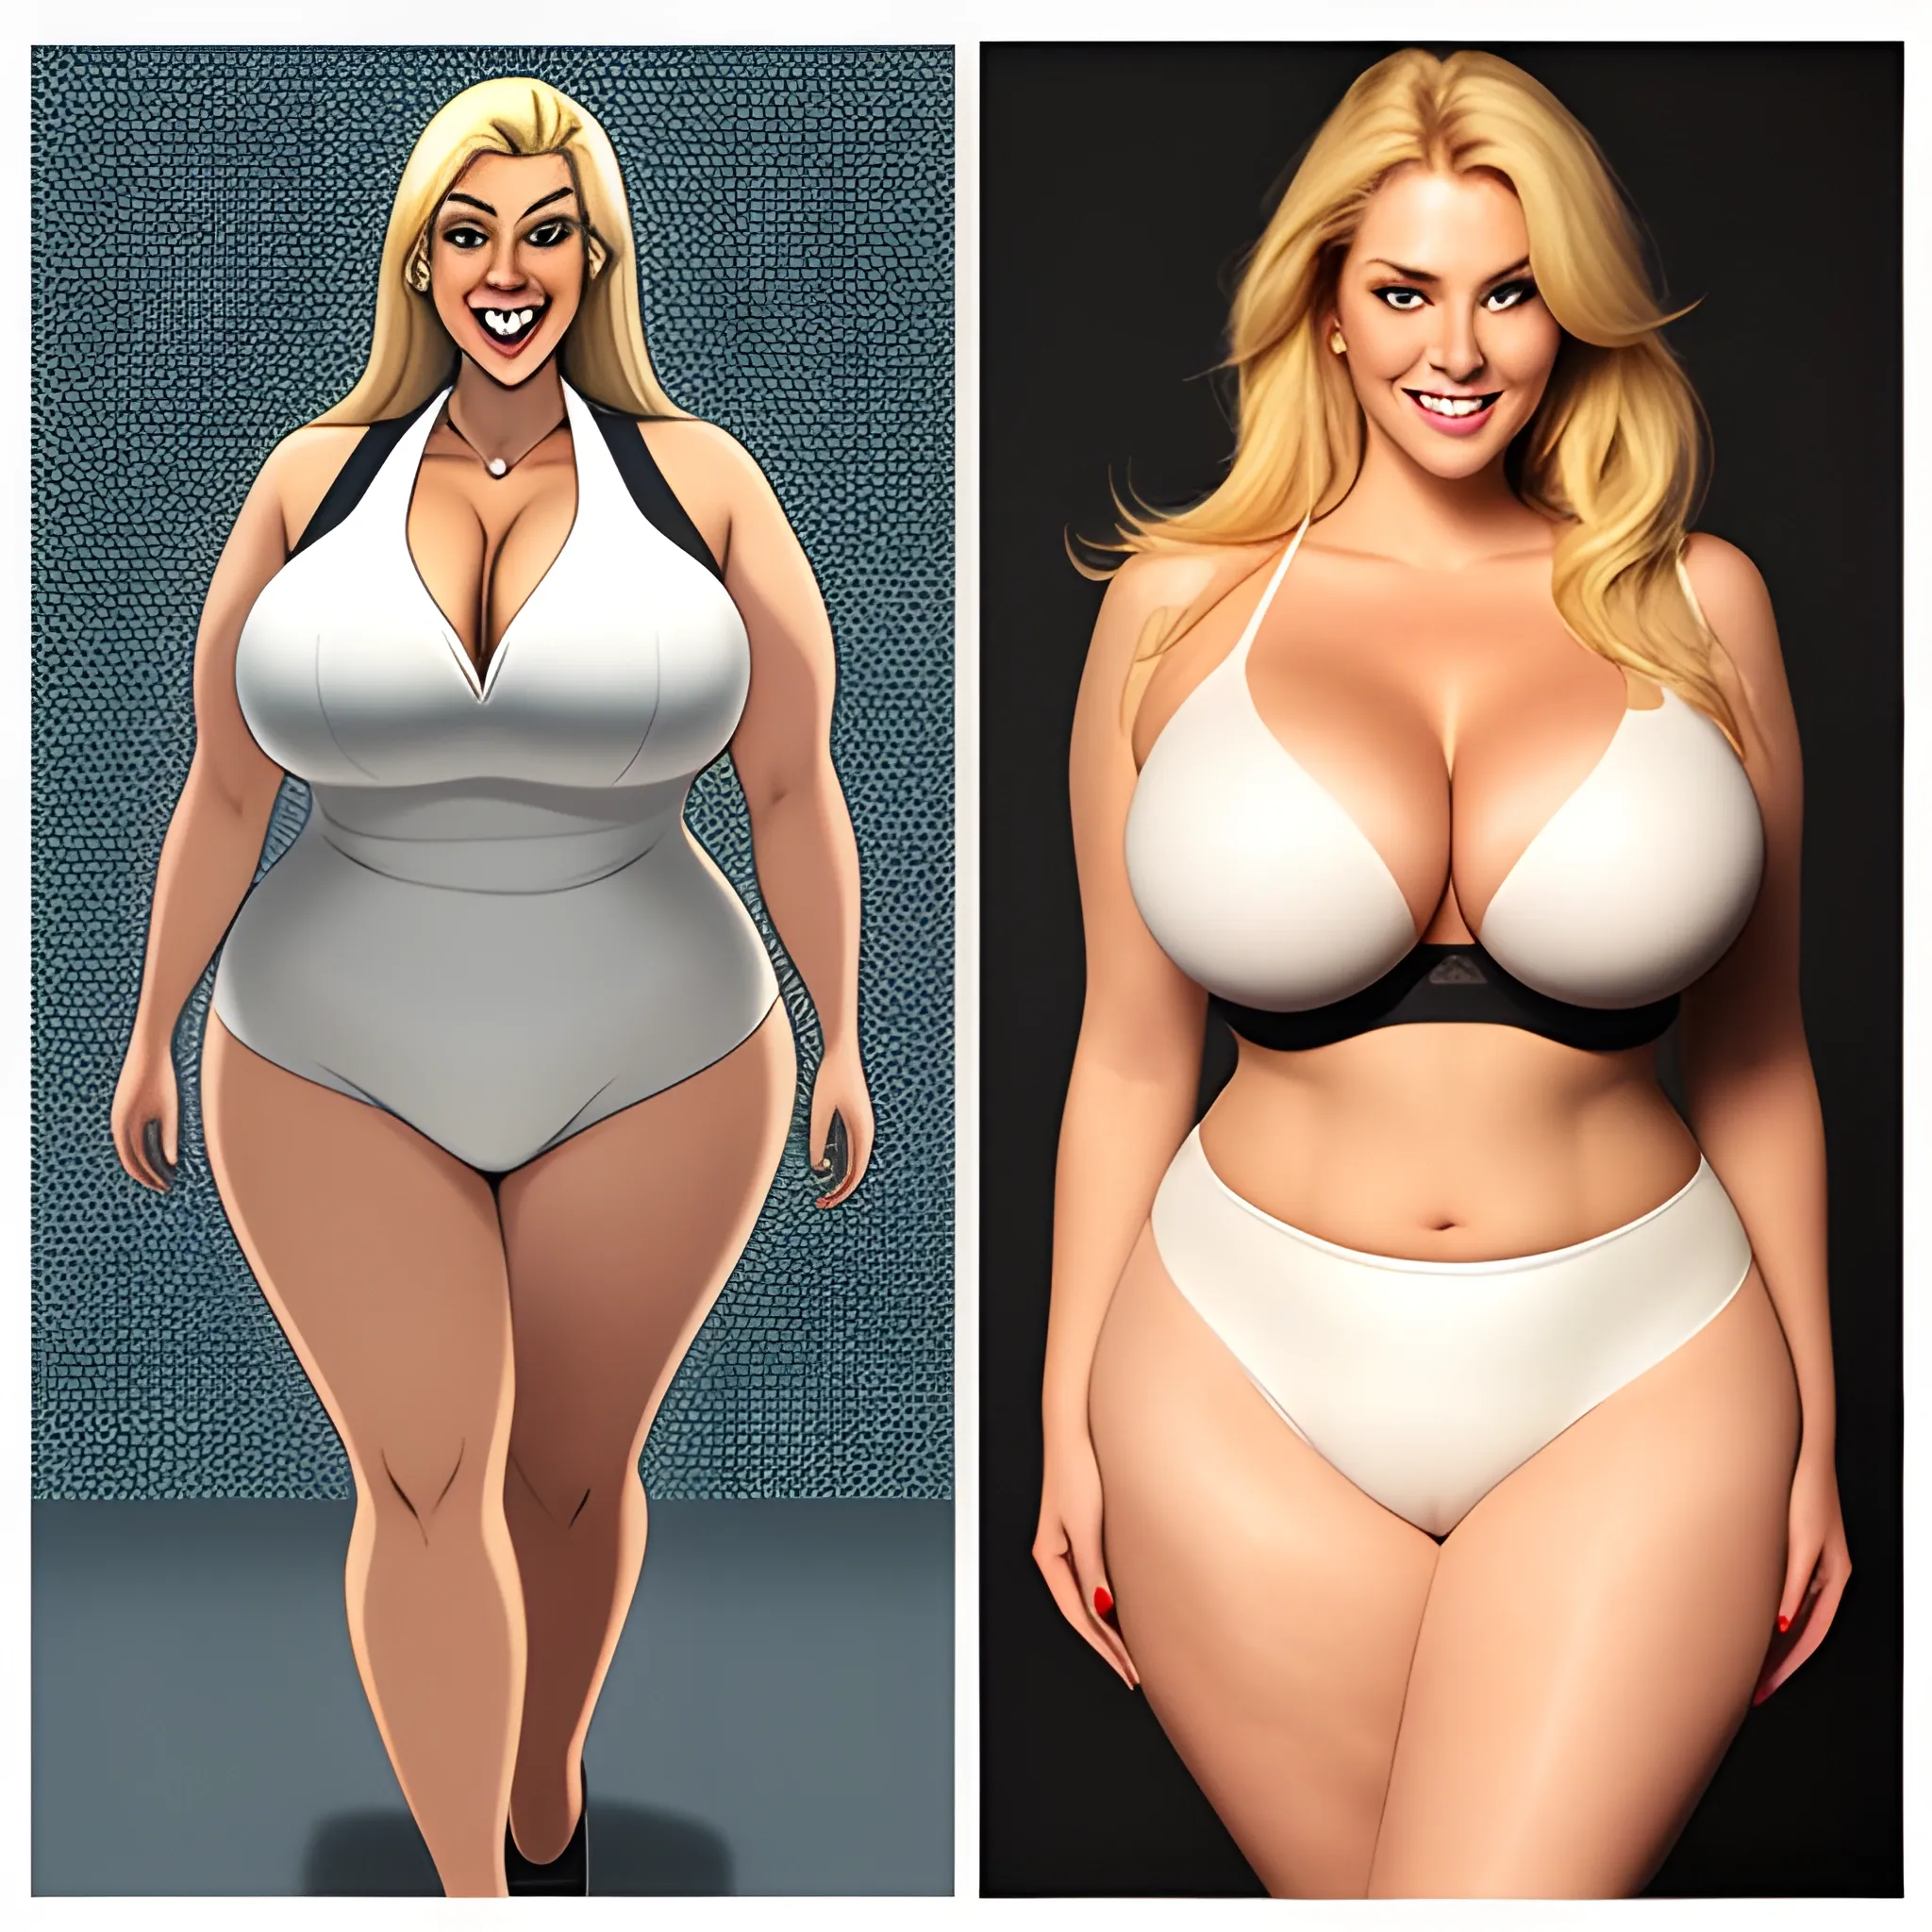 large and tall blonde plus size girl with small head, broad shou 